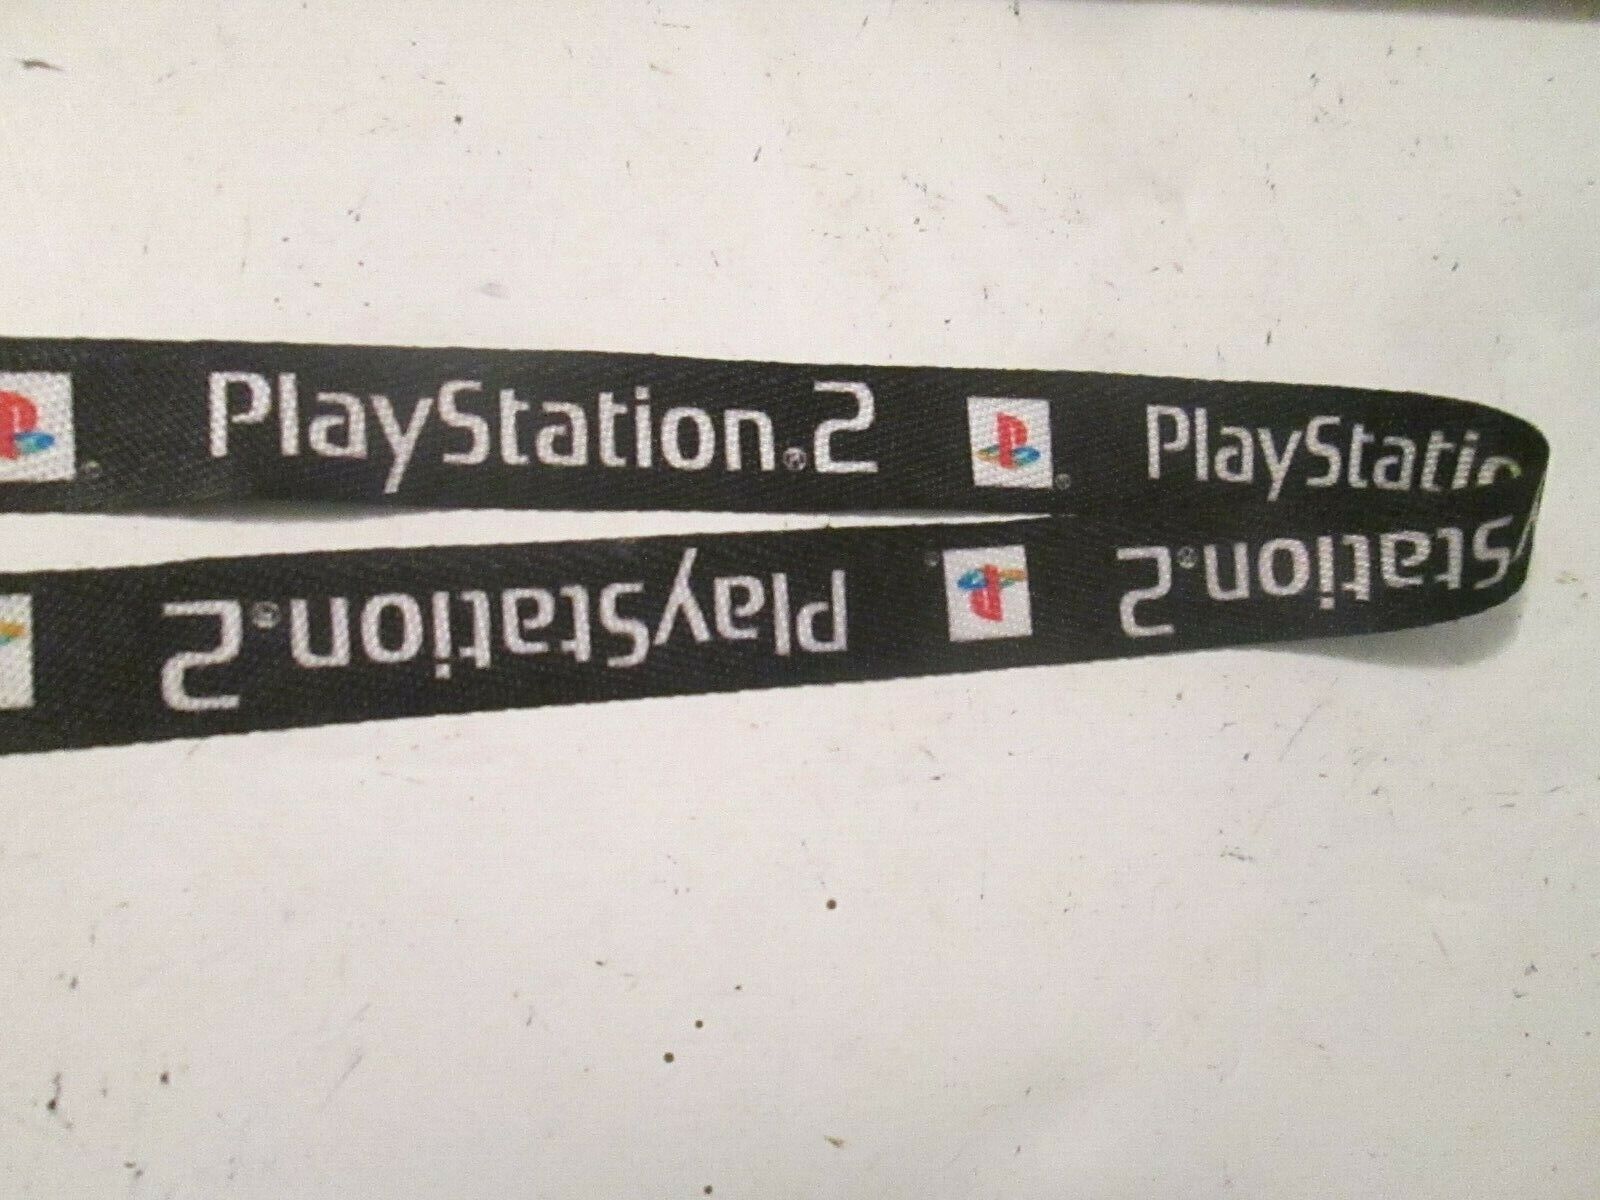 Gaming Racing Play Station 2 ID - Credential Lanyard in Black from ALMS Sponsor 